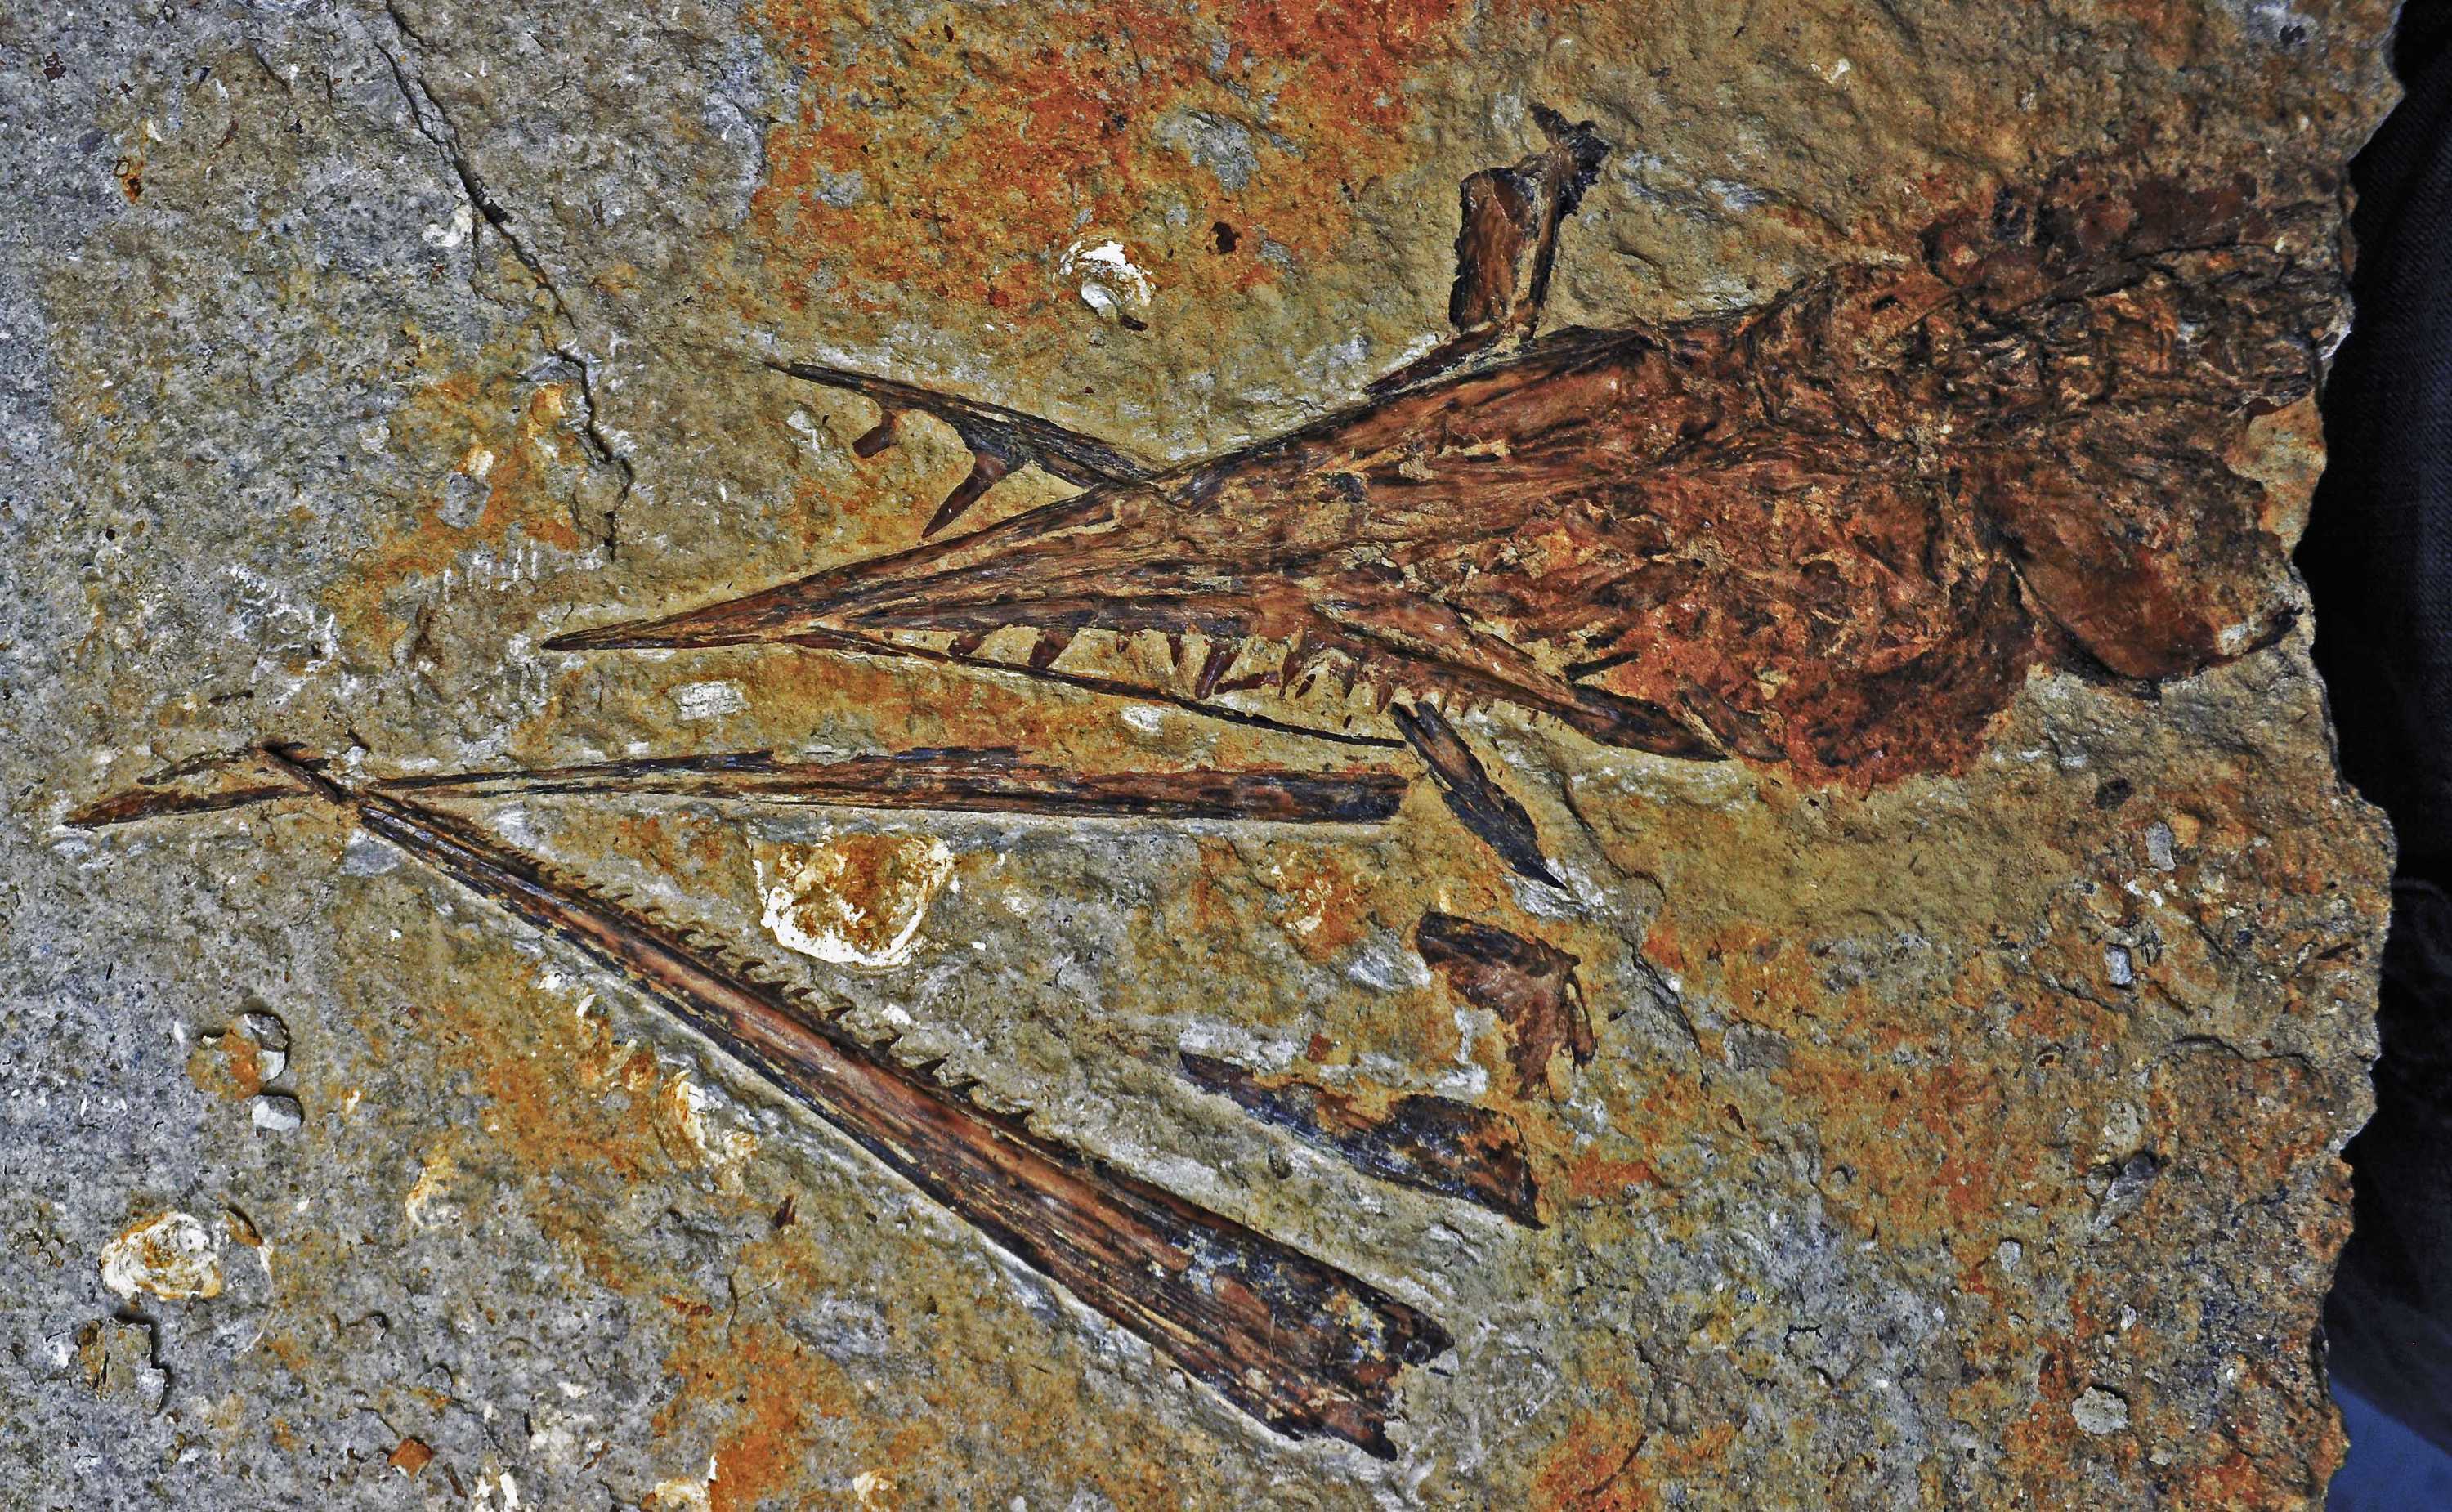 Ancient sabre-toothed fish fossil unearthed in outback Queensland